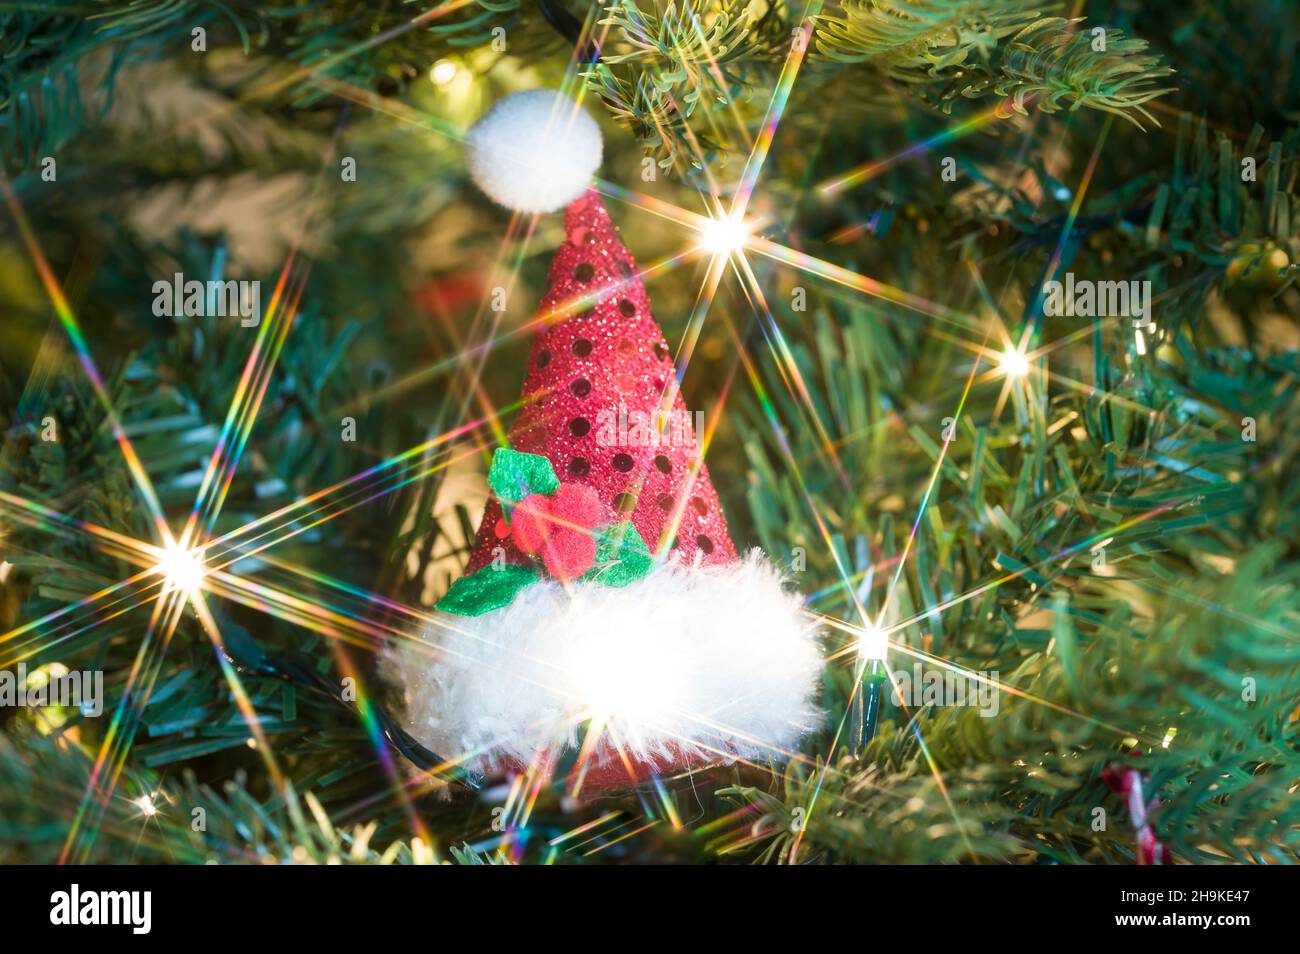 Beautiful Christmas decorations surrounded by lights Stock Photo